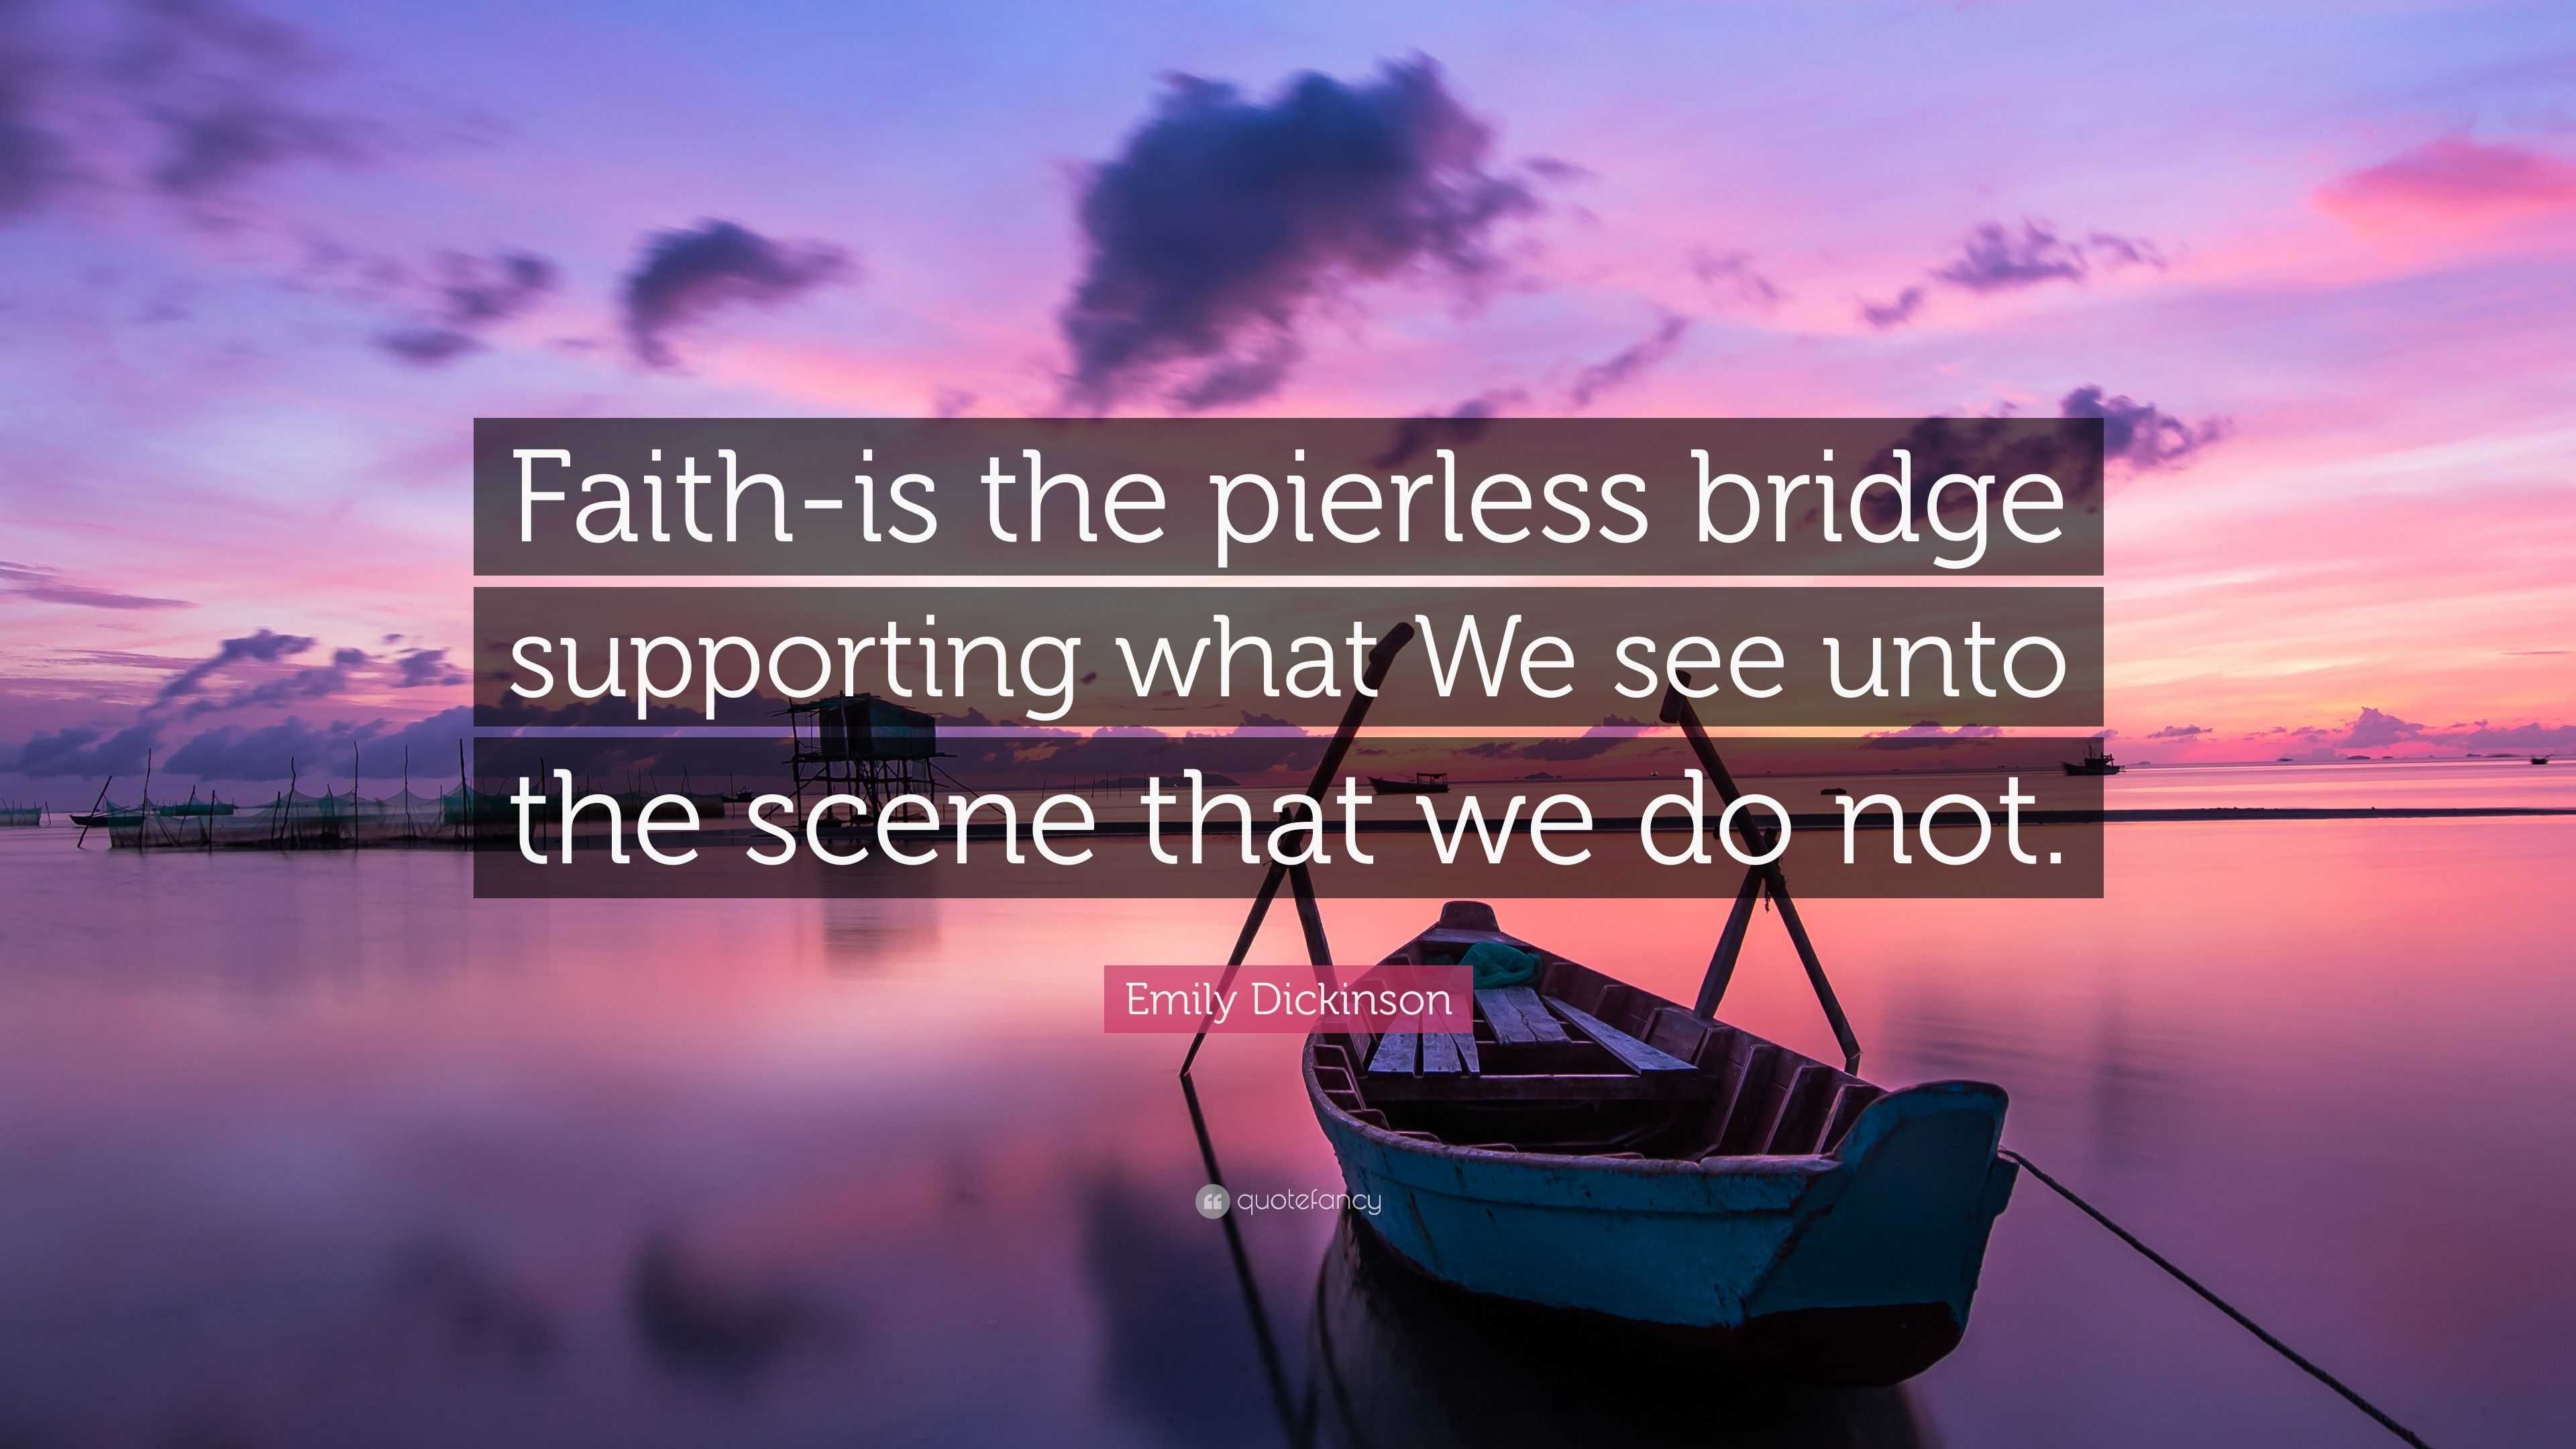 Emily Dickinson Quote: “Faith-is the pierless bridge supporting what We ...